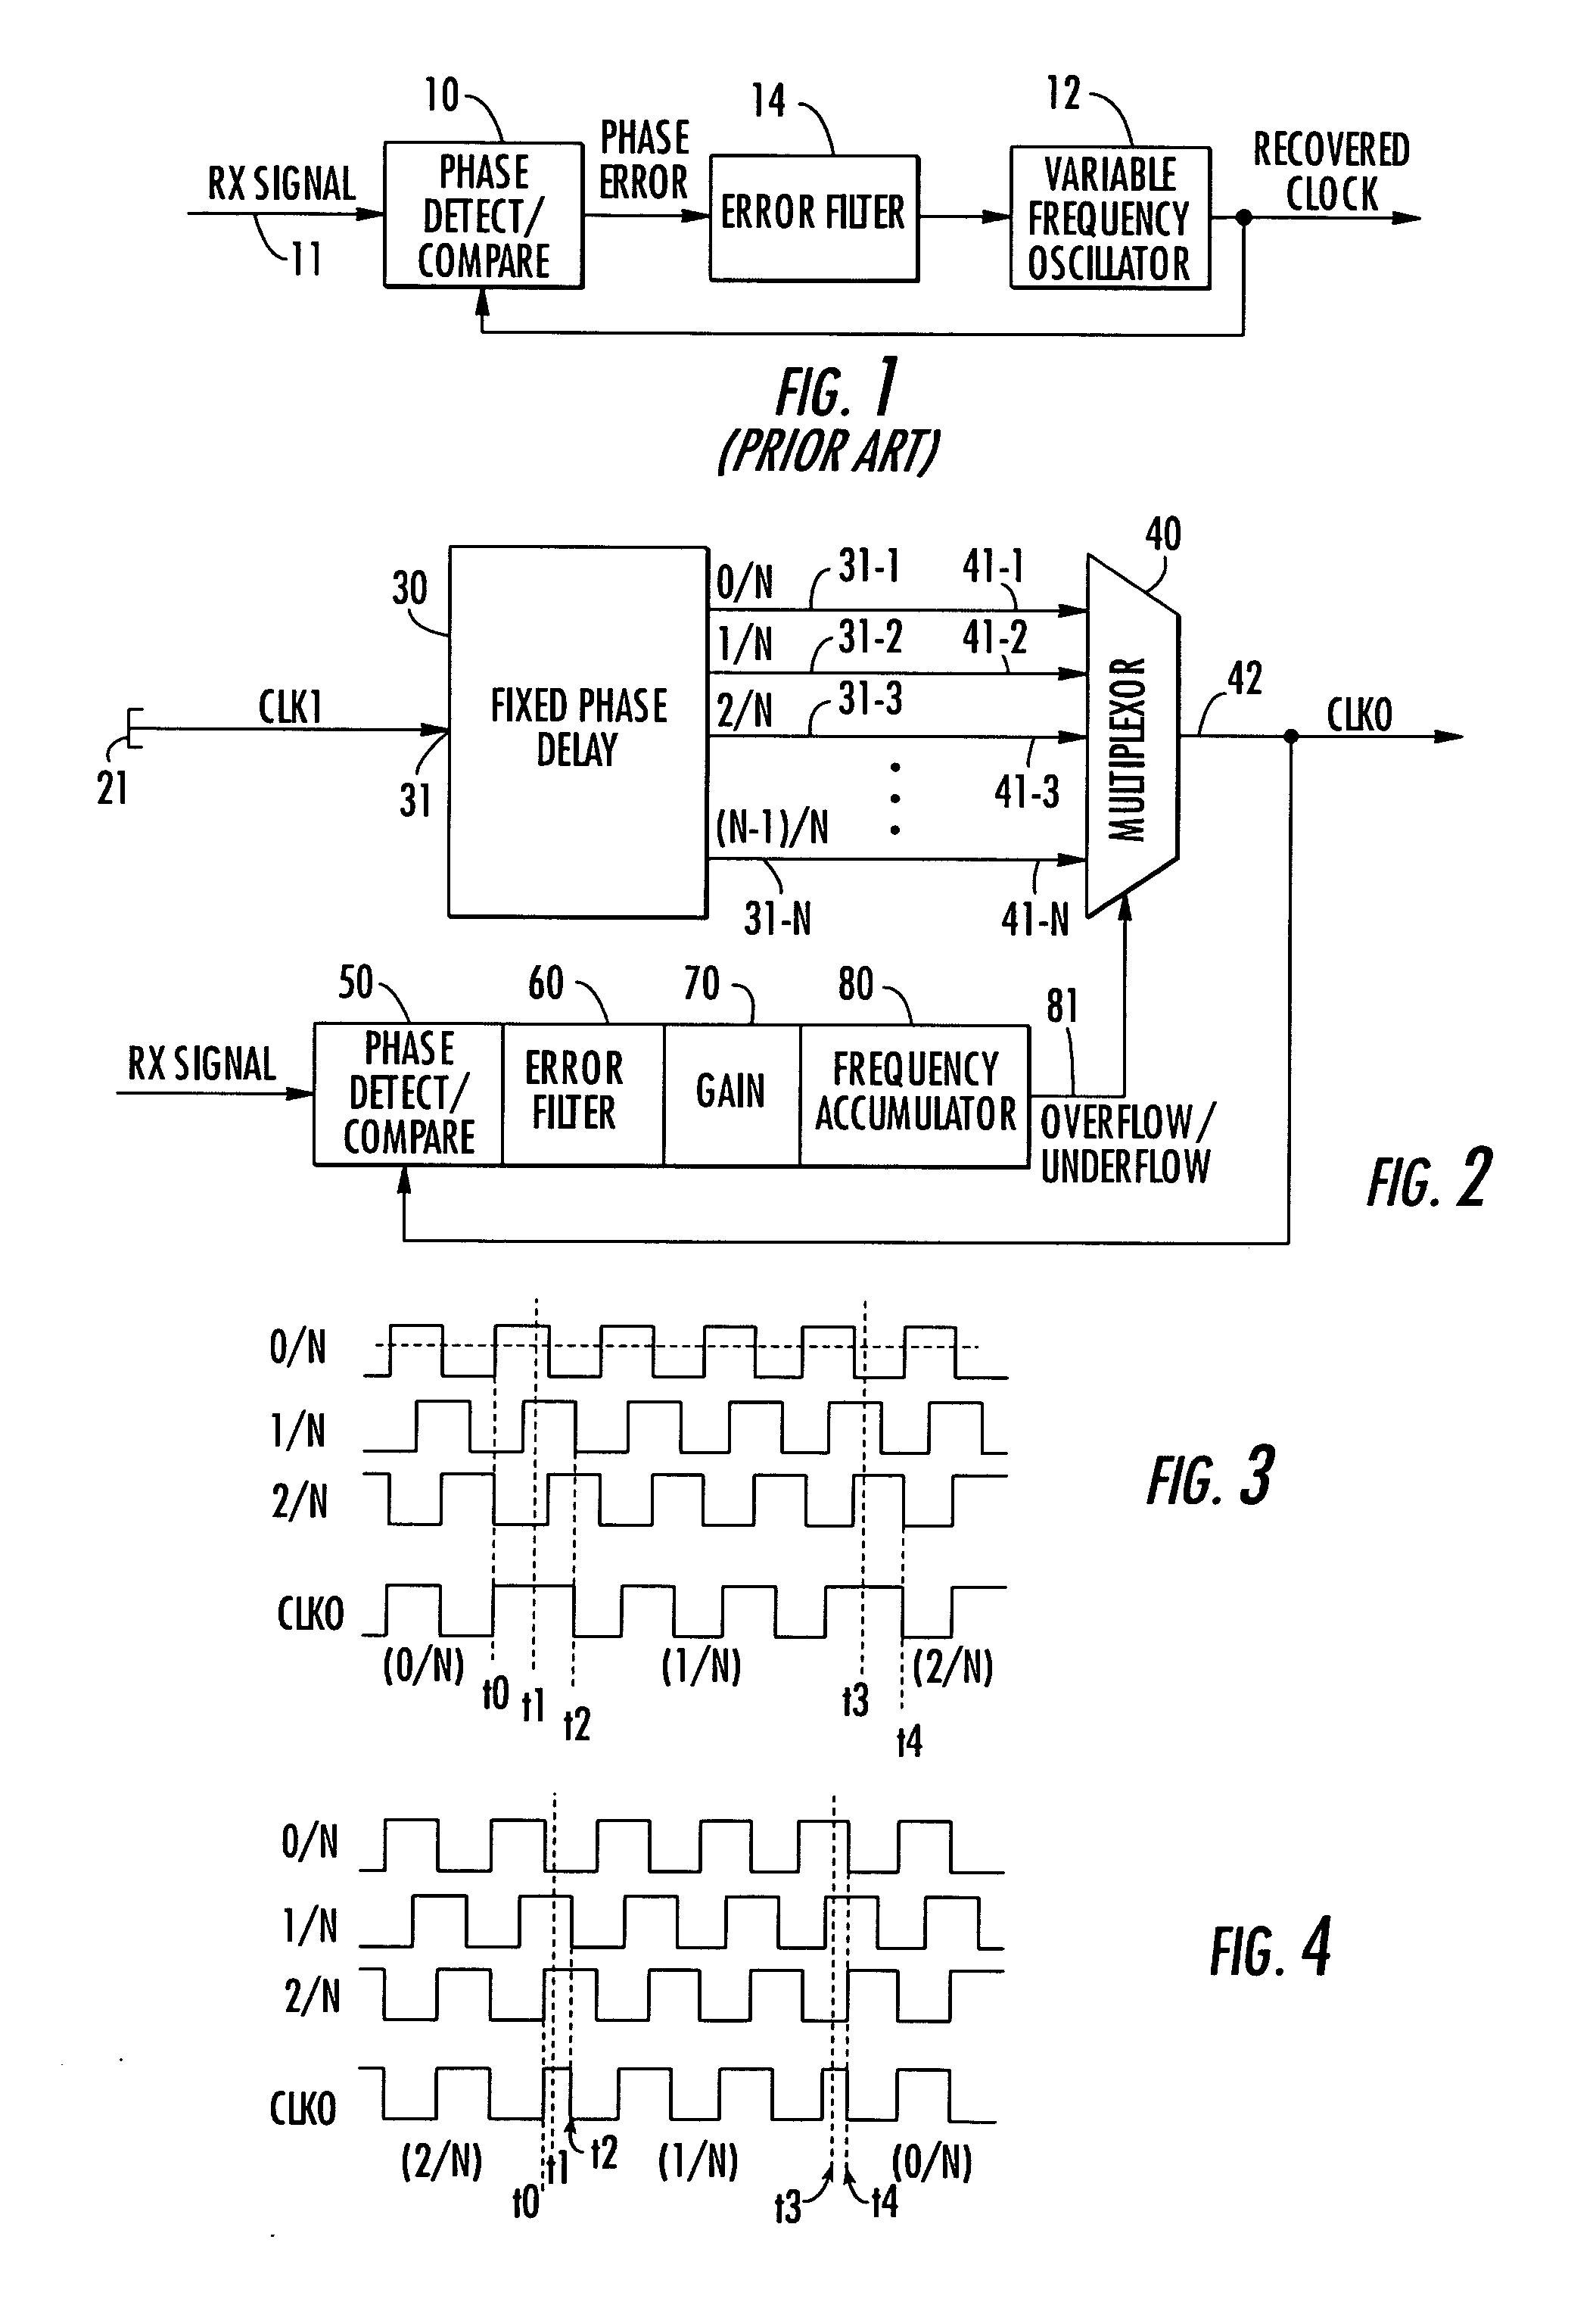 Digital clock recovery circuit employing fixed clock oscillator driving fractional delay line